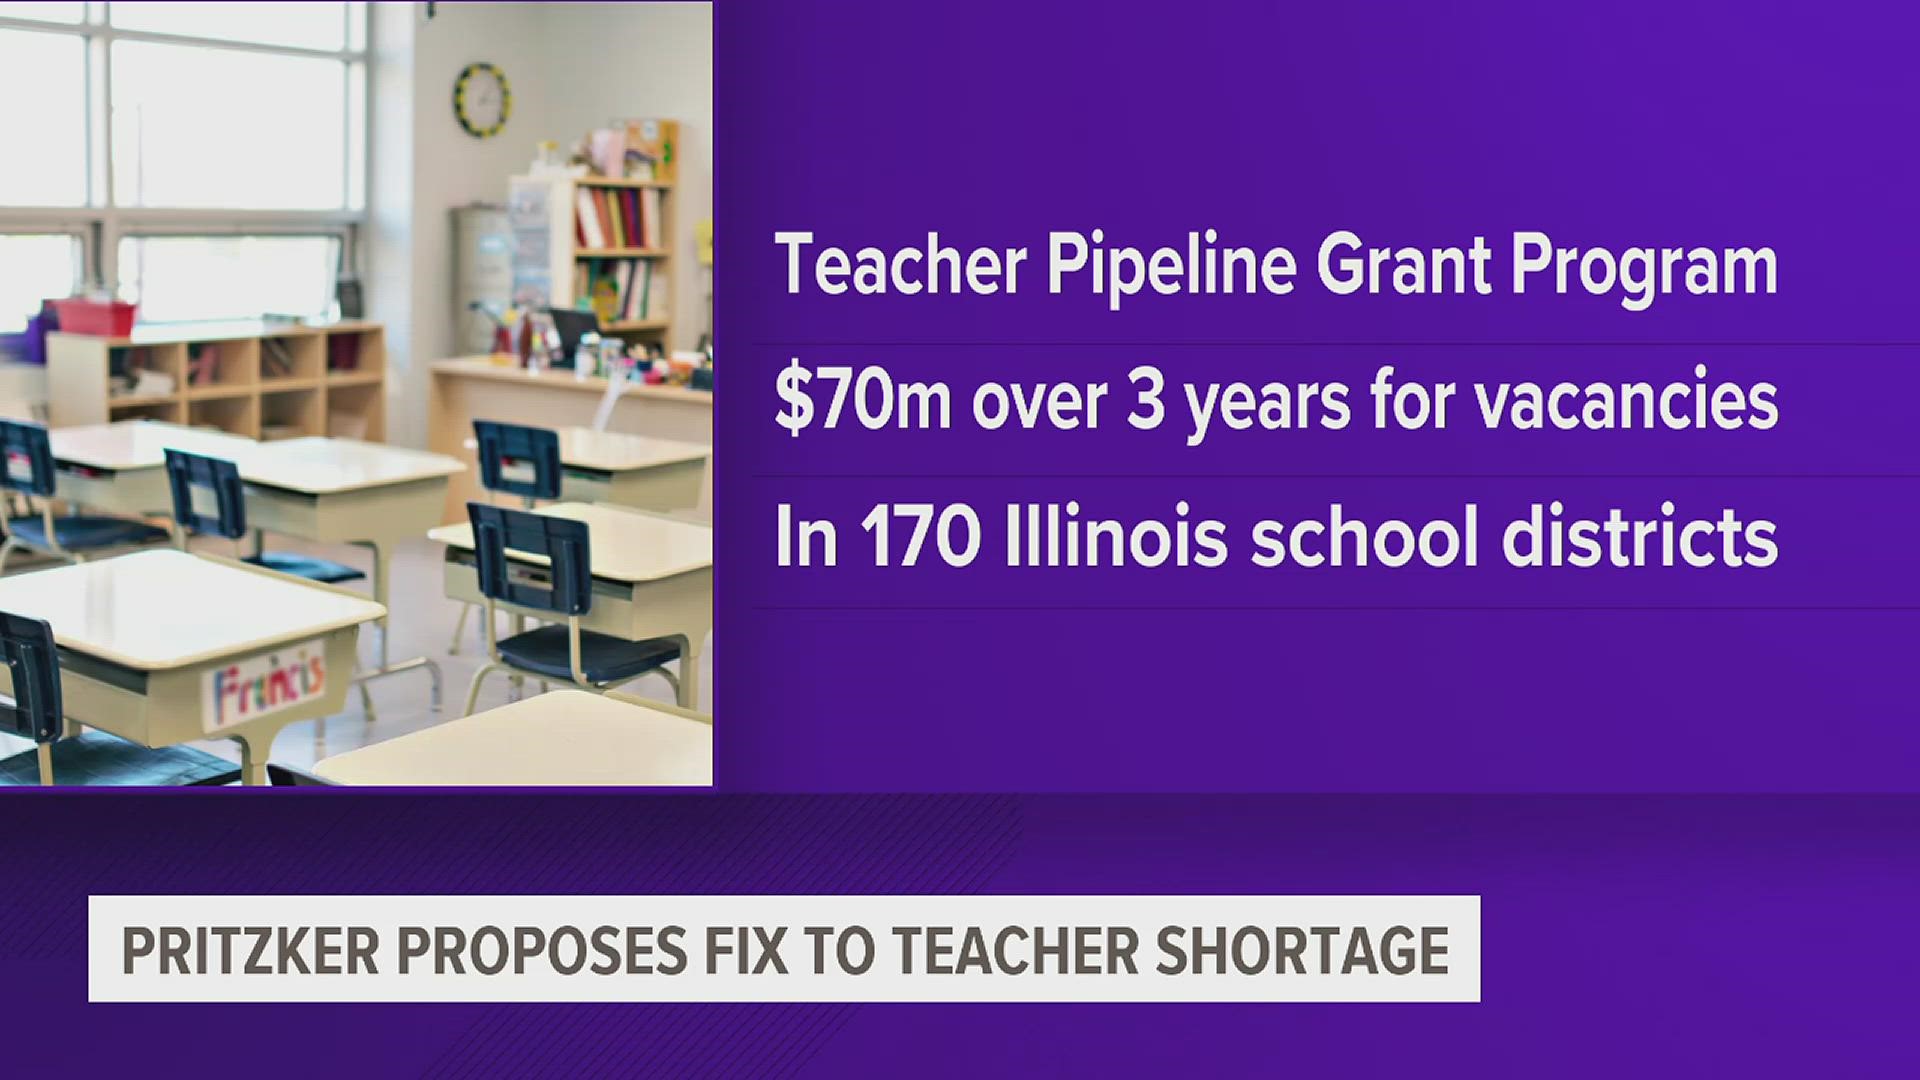 The grant program targets vacancies in 170 school districts accounting for 80% of unfilled positions.